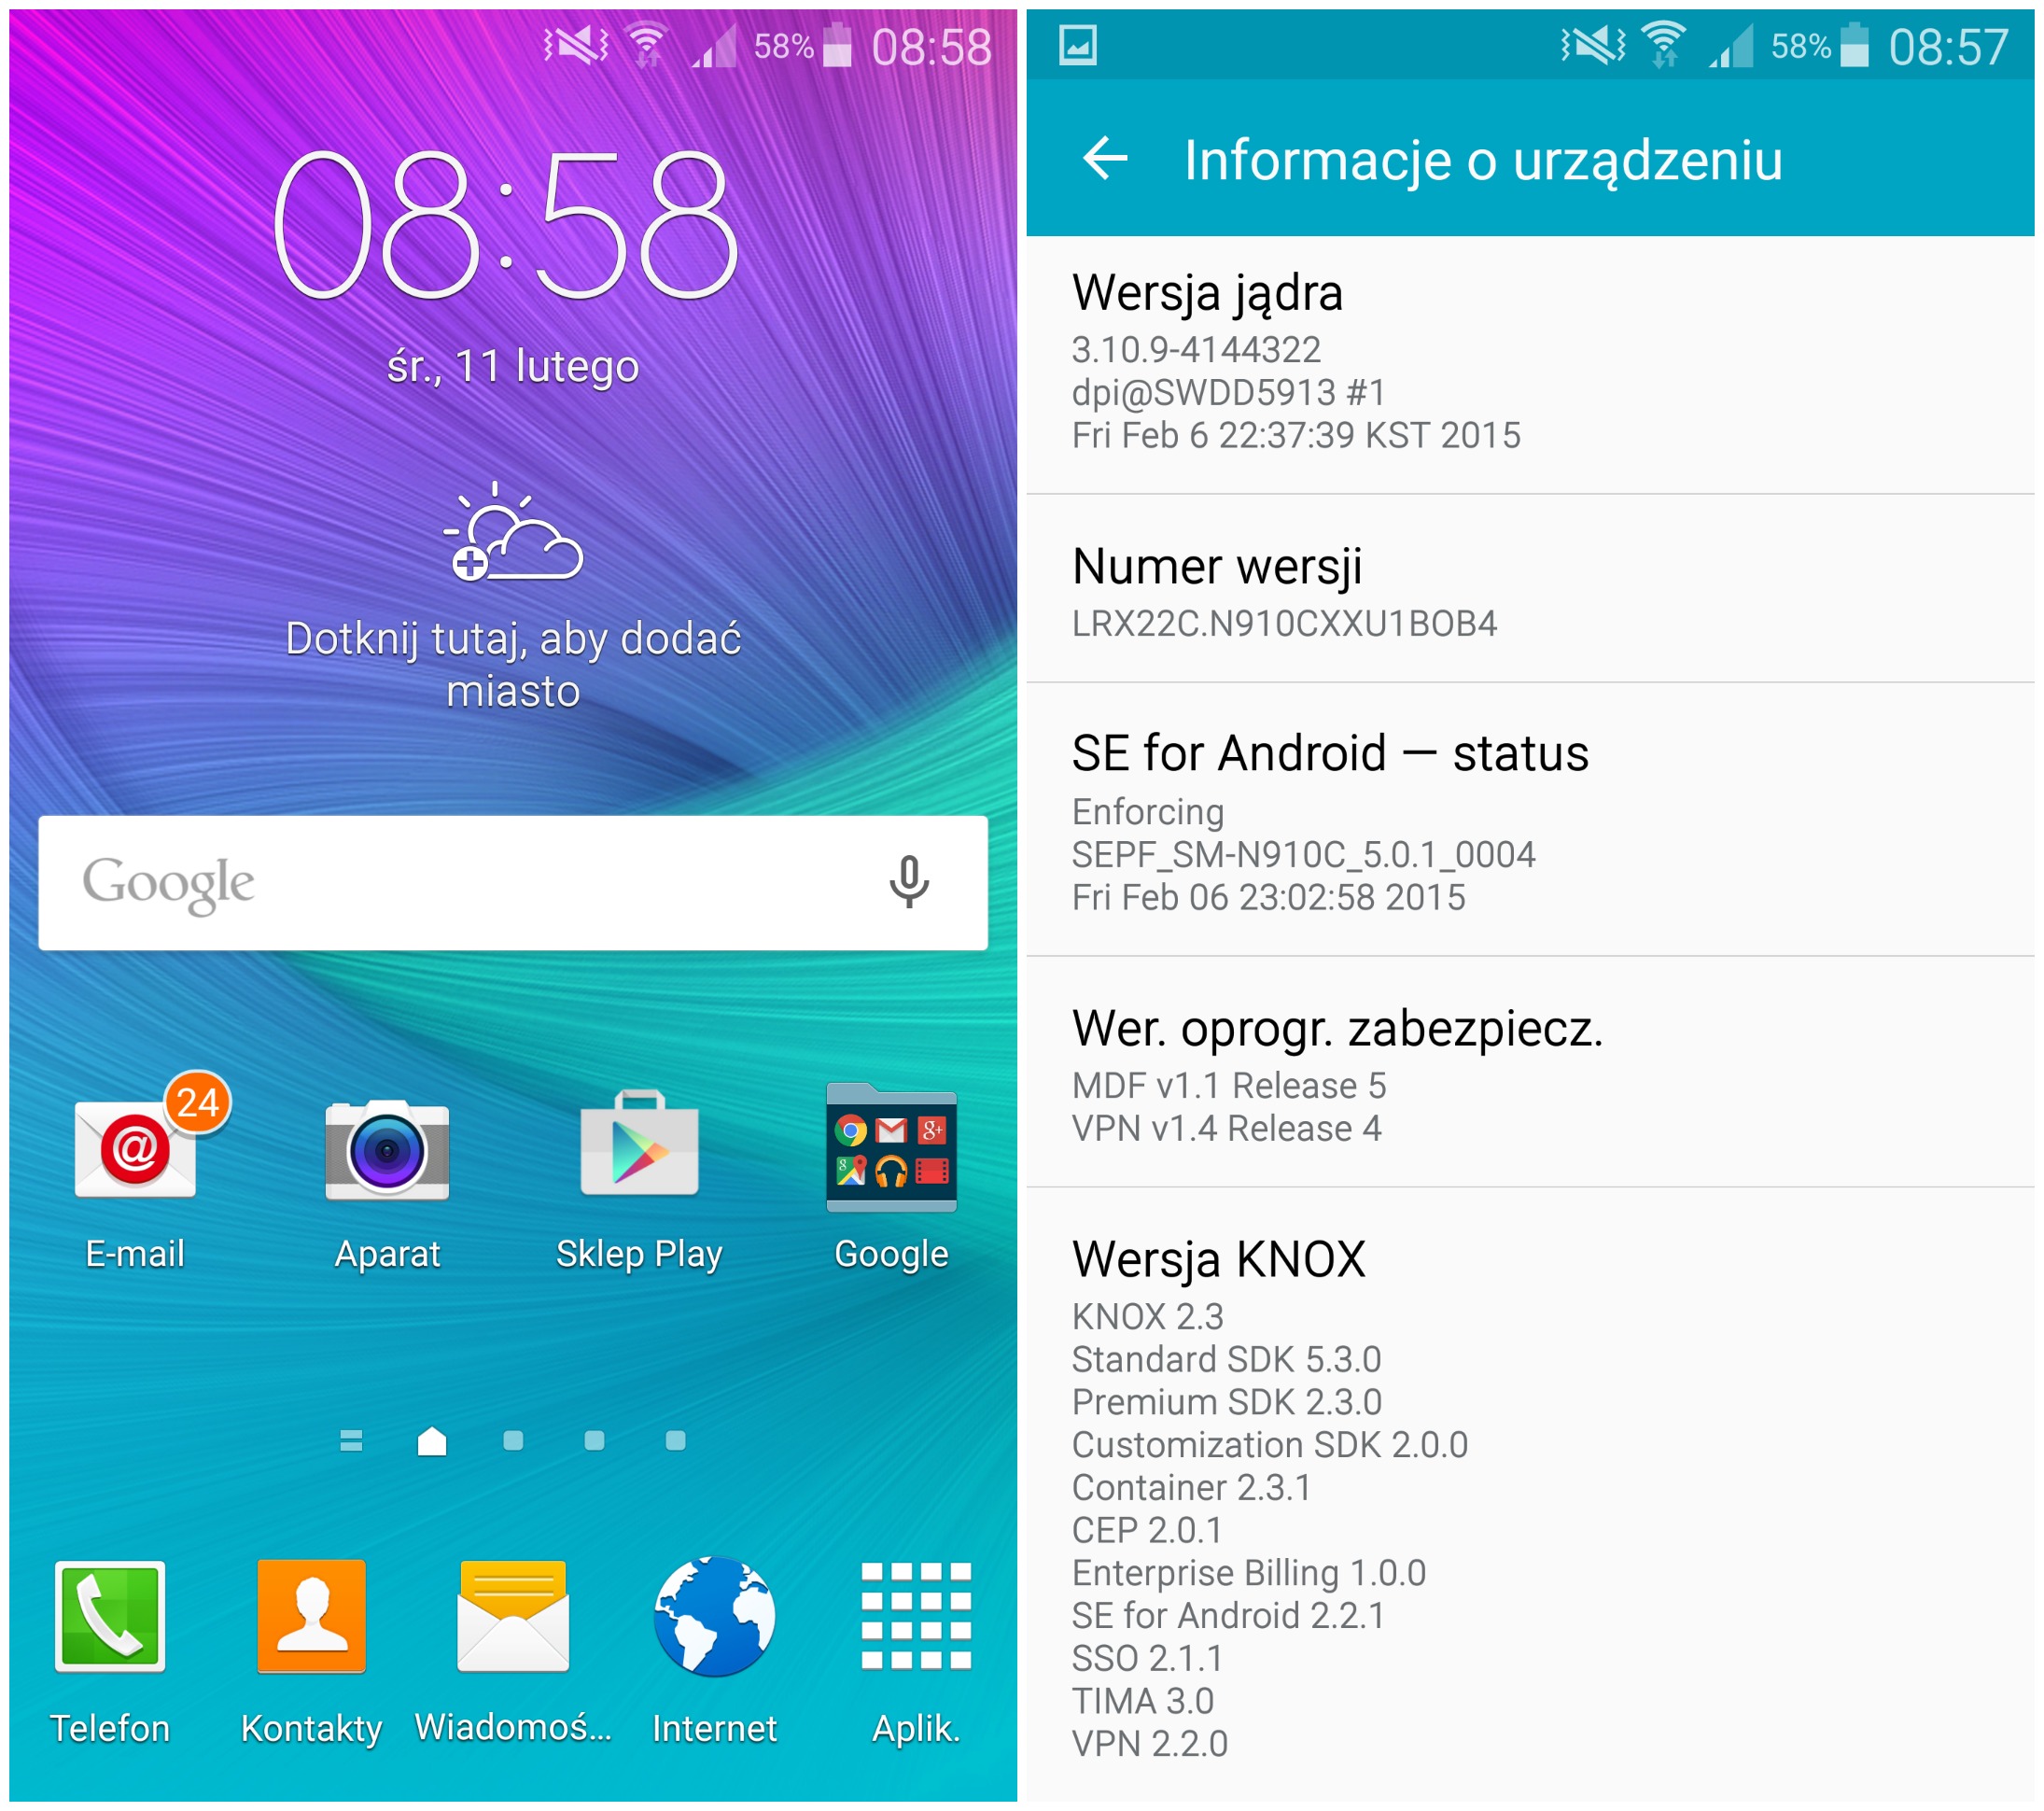 Samsung Galaxy Note 4 and Edge will get Android 5.0.1 directly